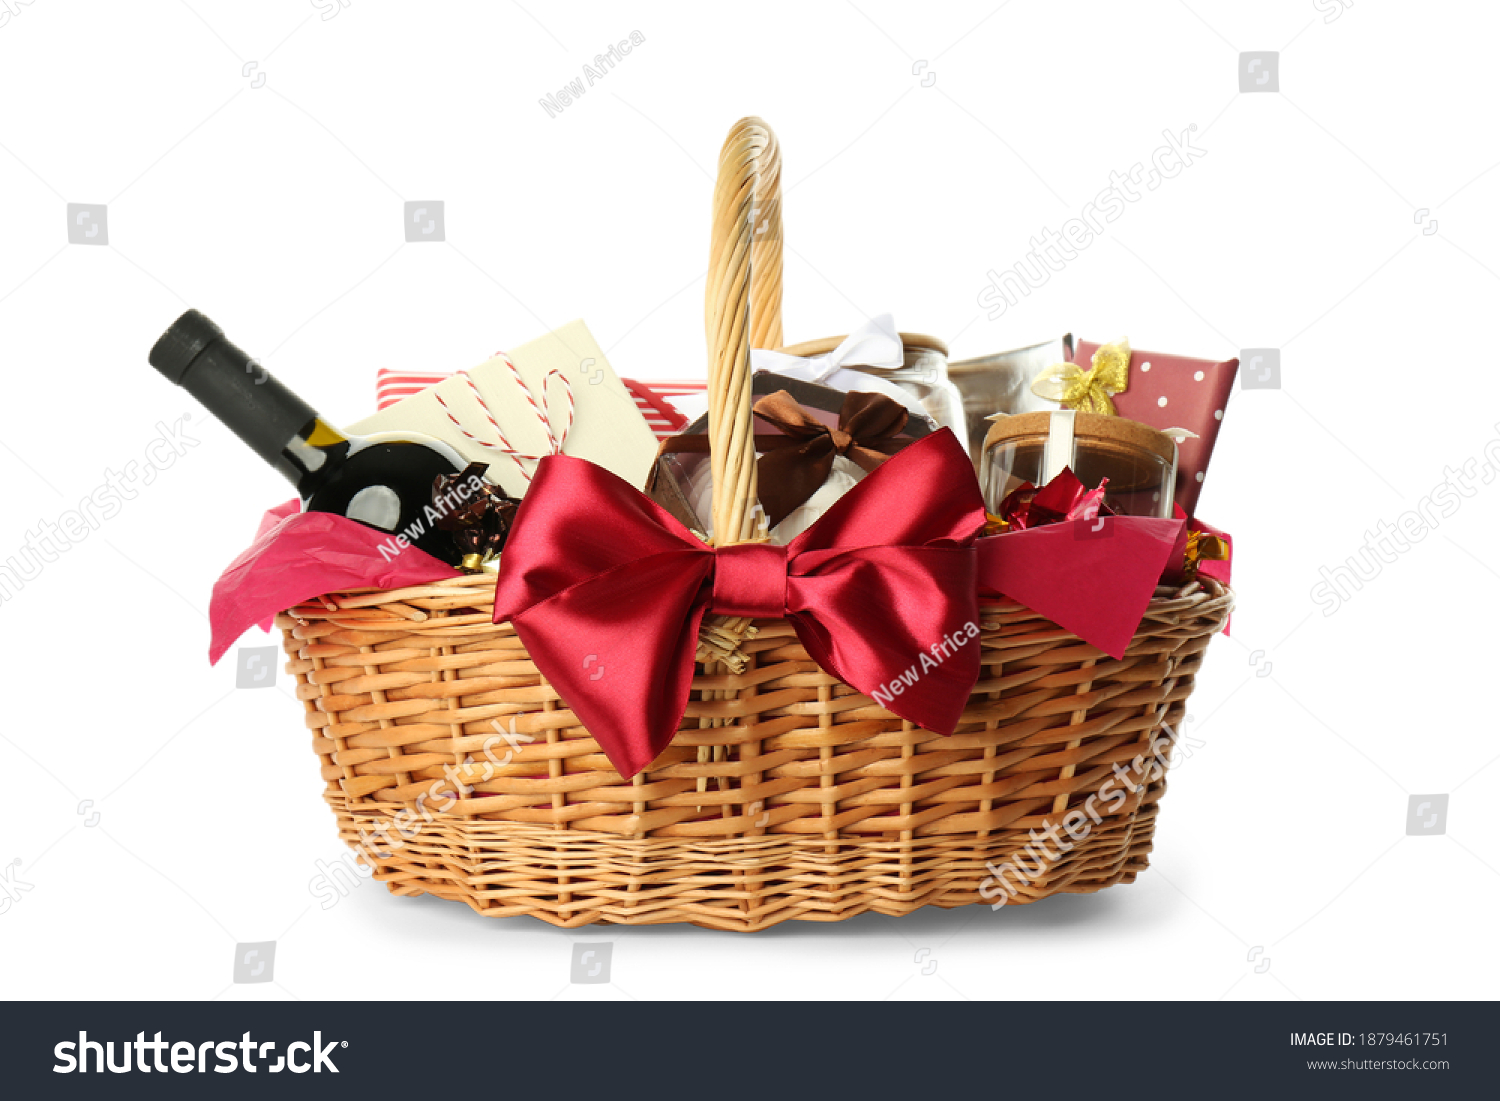 Wicker basket full of gifts isolated on white #1879461751